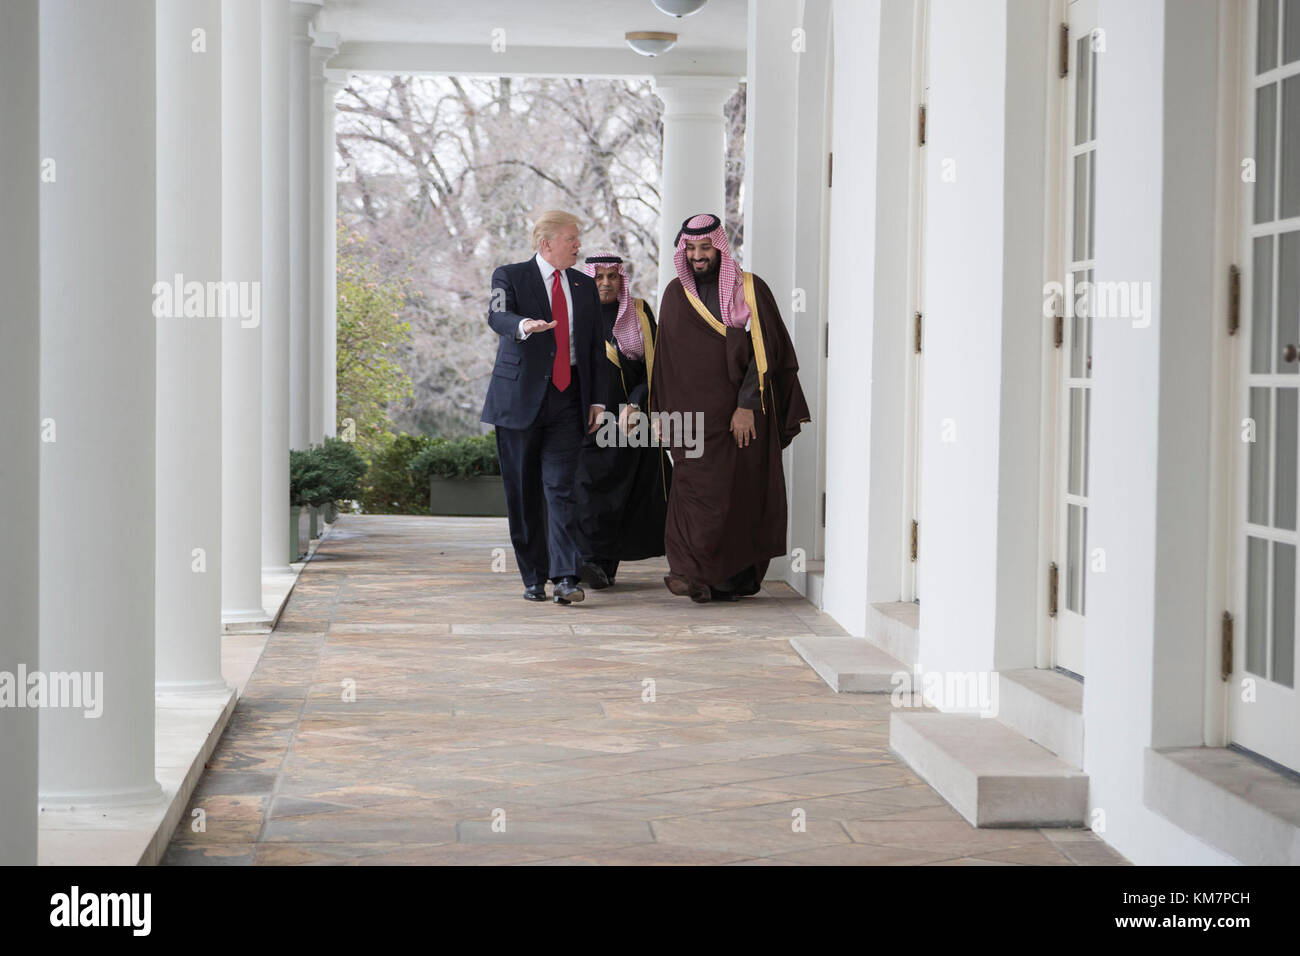 President Donald Trump walks with the Saudi Arabia’s Deputy Crown Prince Mohammed bin Salman, Tuesday, March 14, 2017, along the Colonnade outside the Oval Office of the White House in Washington, D.C. Stock Photo